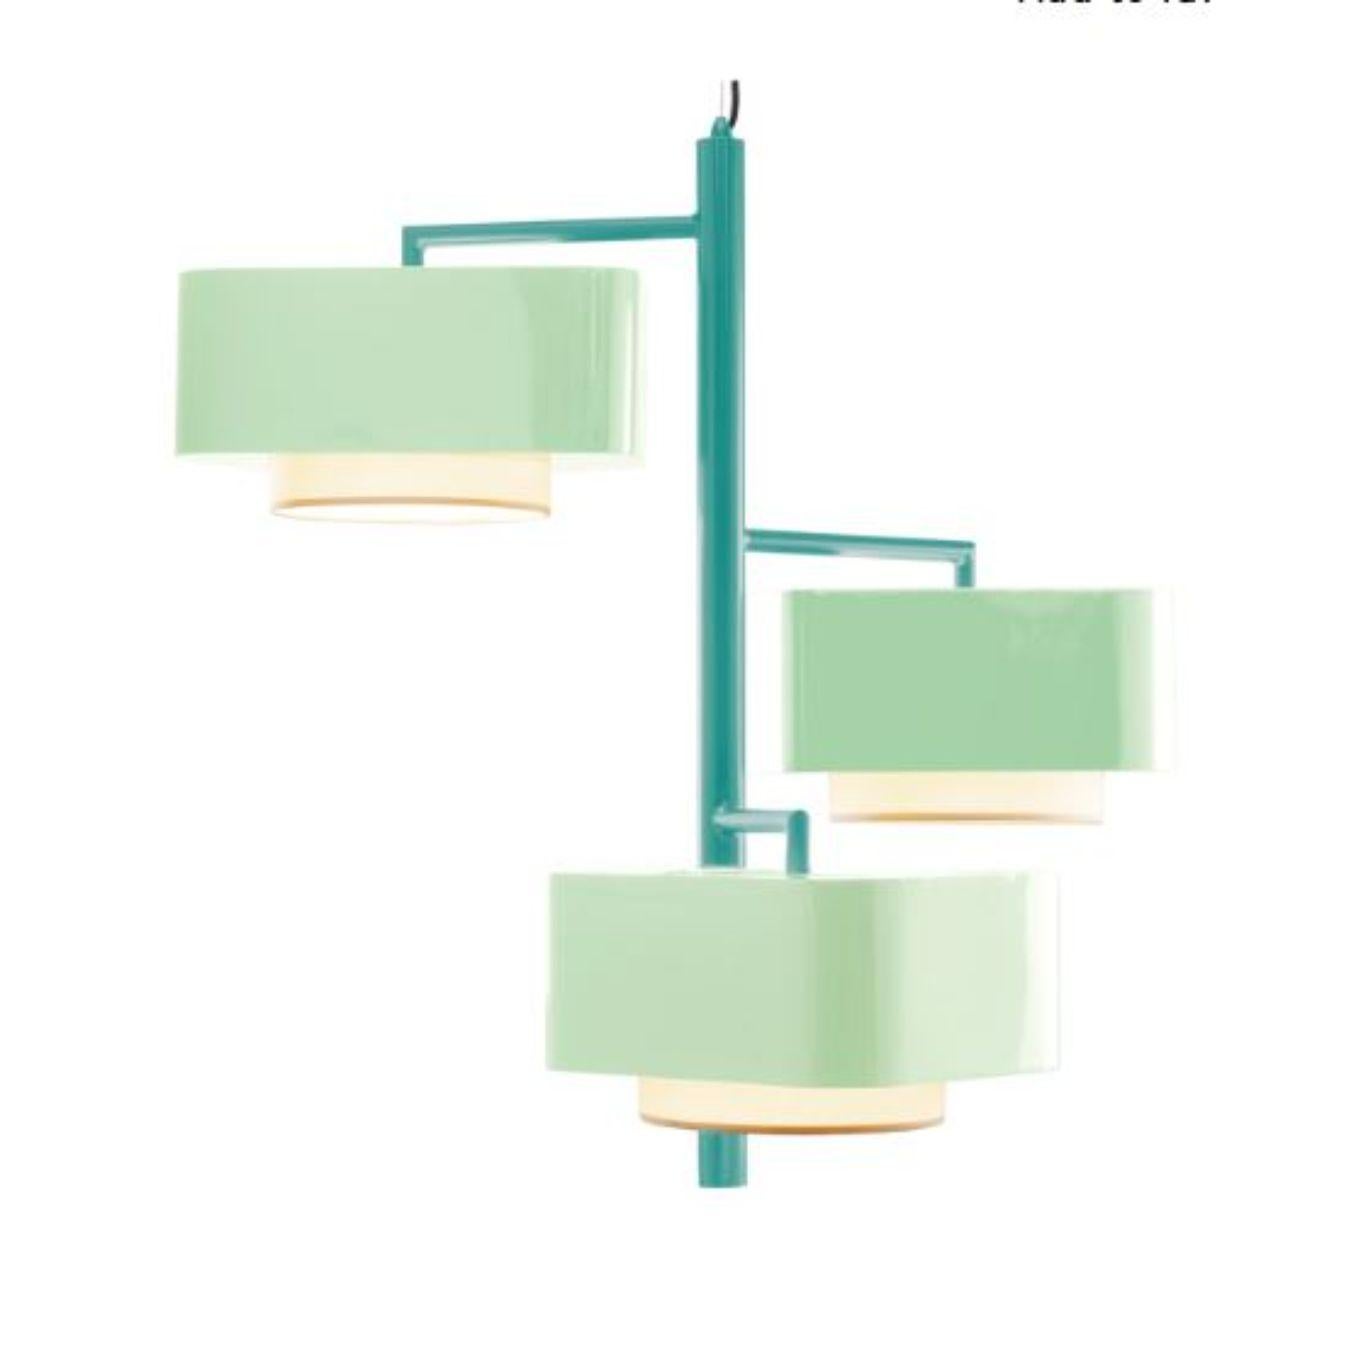 Mint and Dream Carousel I Suspension lamp by Dooq
Dimensions: W 97 x D 97 x H 86 cm
Materials: lacquered metal.
abat-jour: cotton
Also available in different colors.

Information:
230V/50Hz
E27/3x20W LED
120V/60Hz
E26/3x15W LED
bulbs not